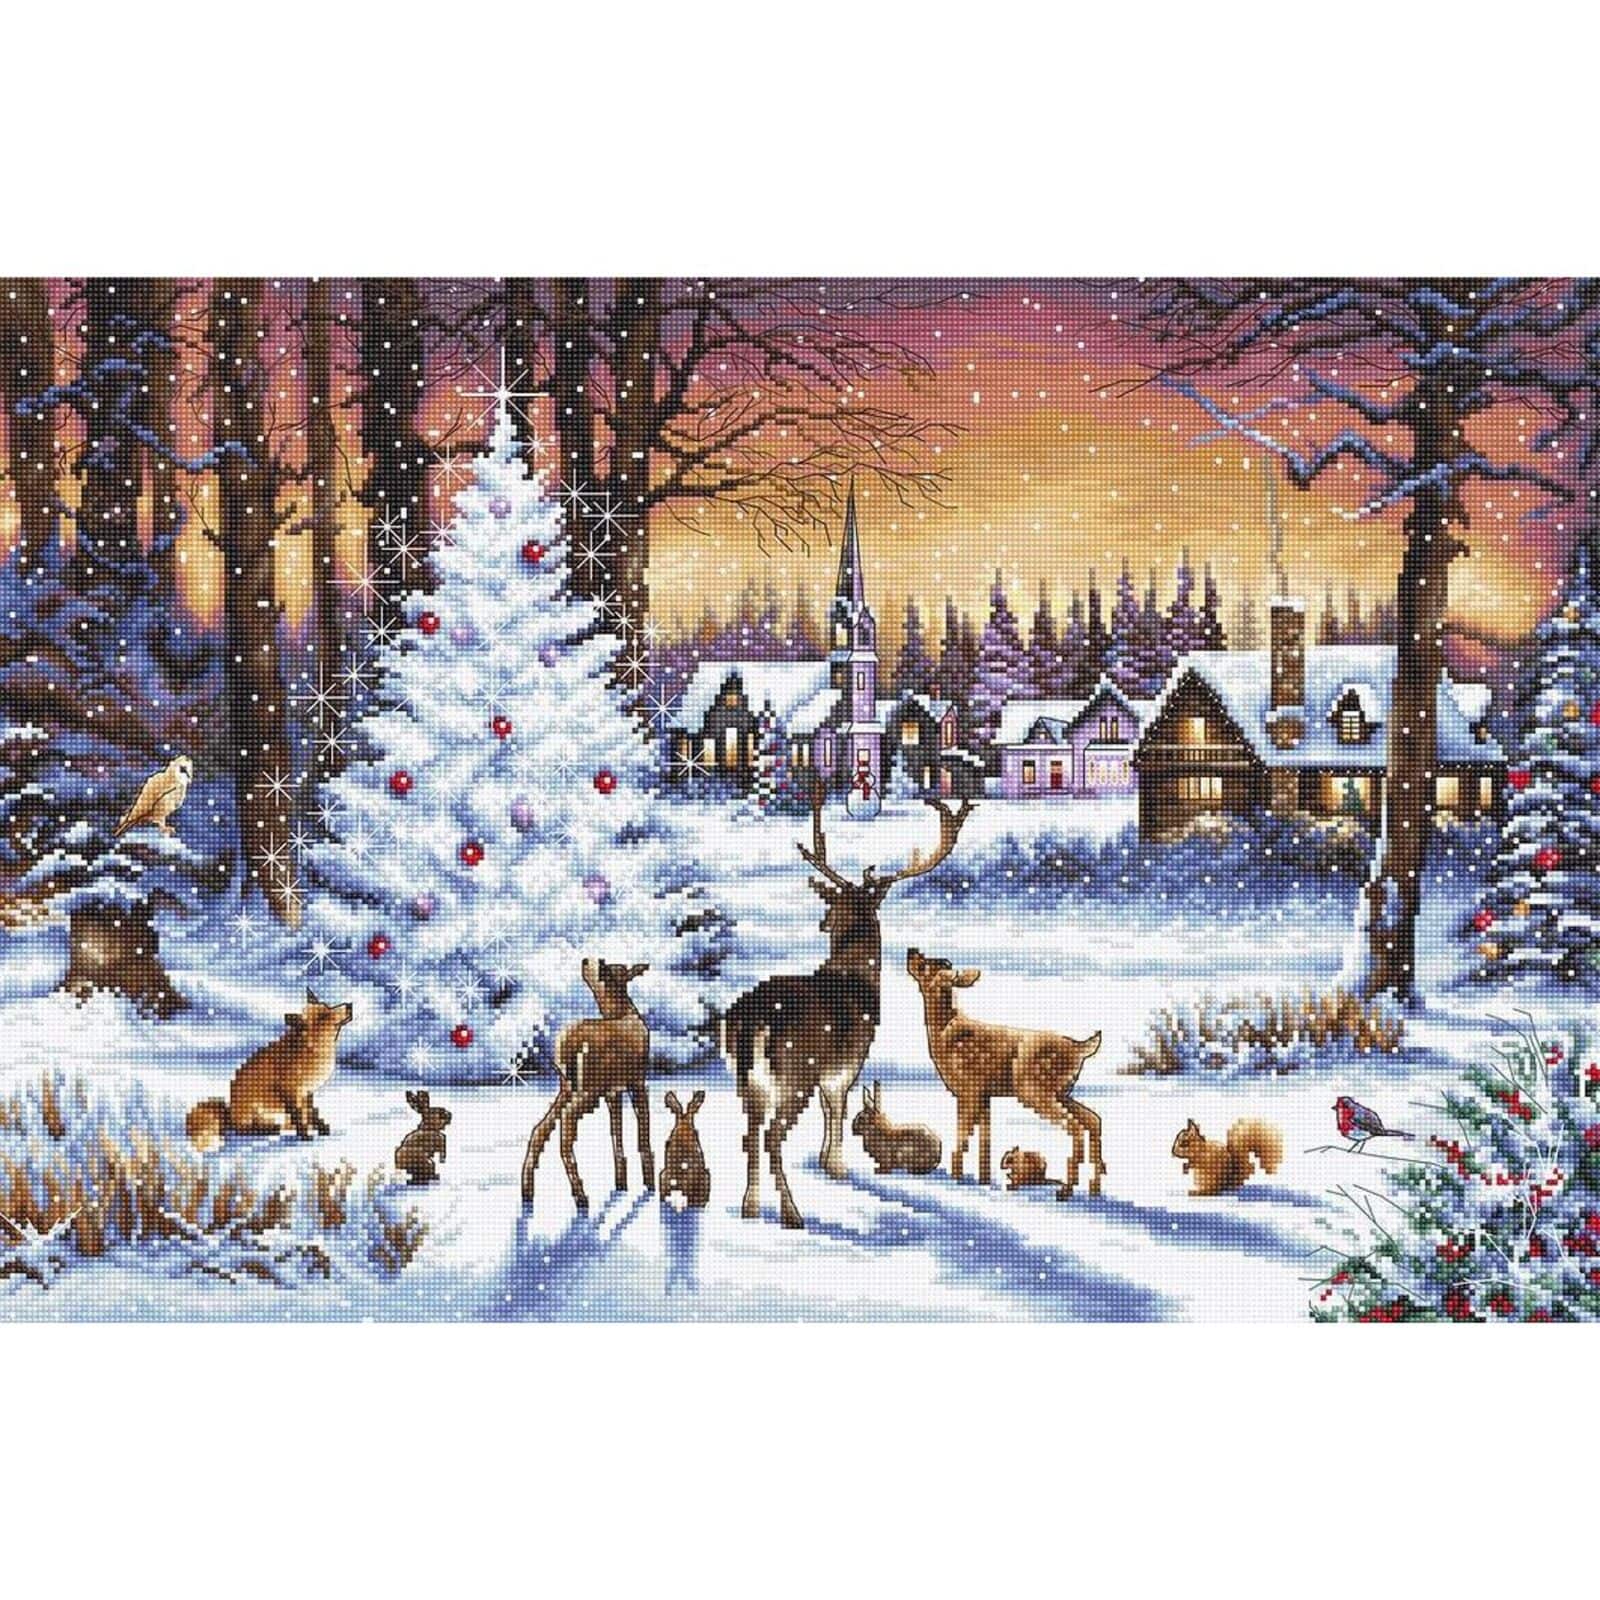 Letistitch Christmas Wood Counted Cross Stitch Kit